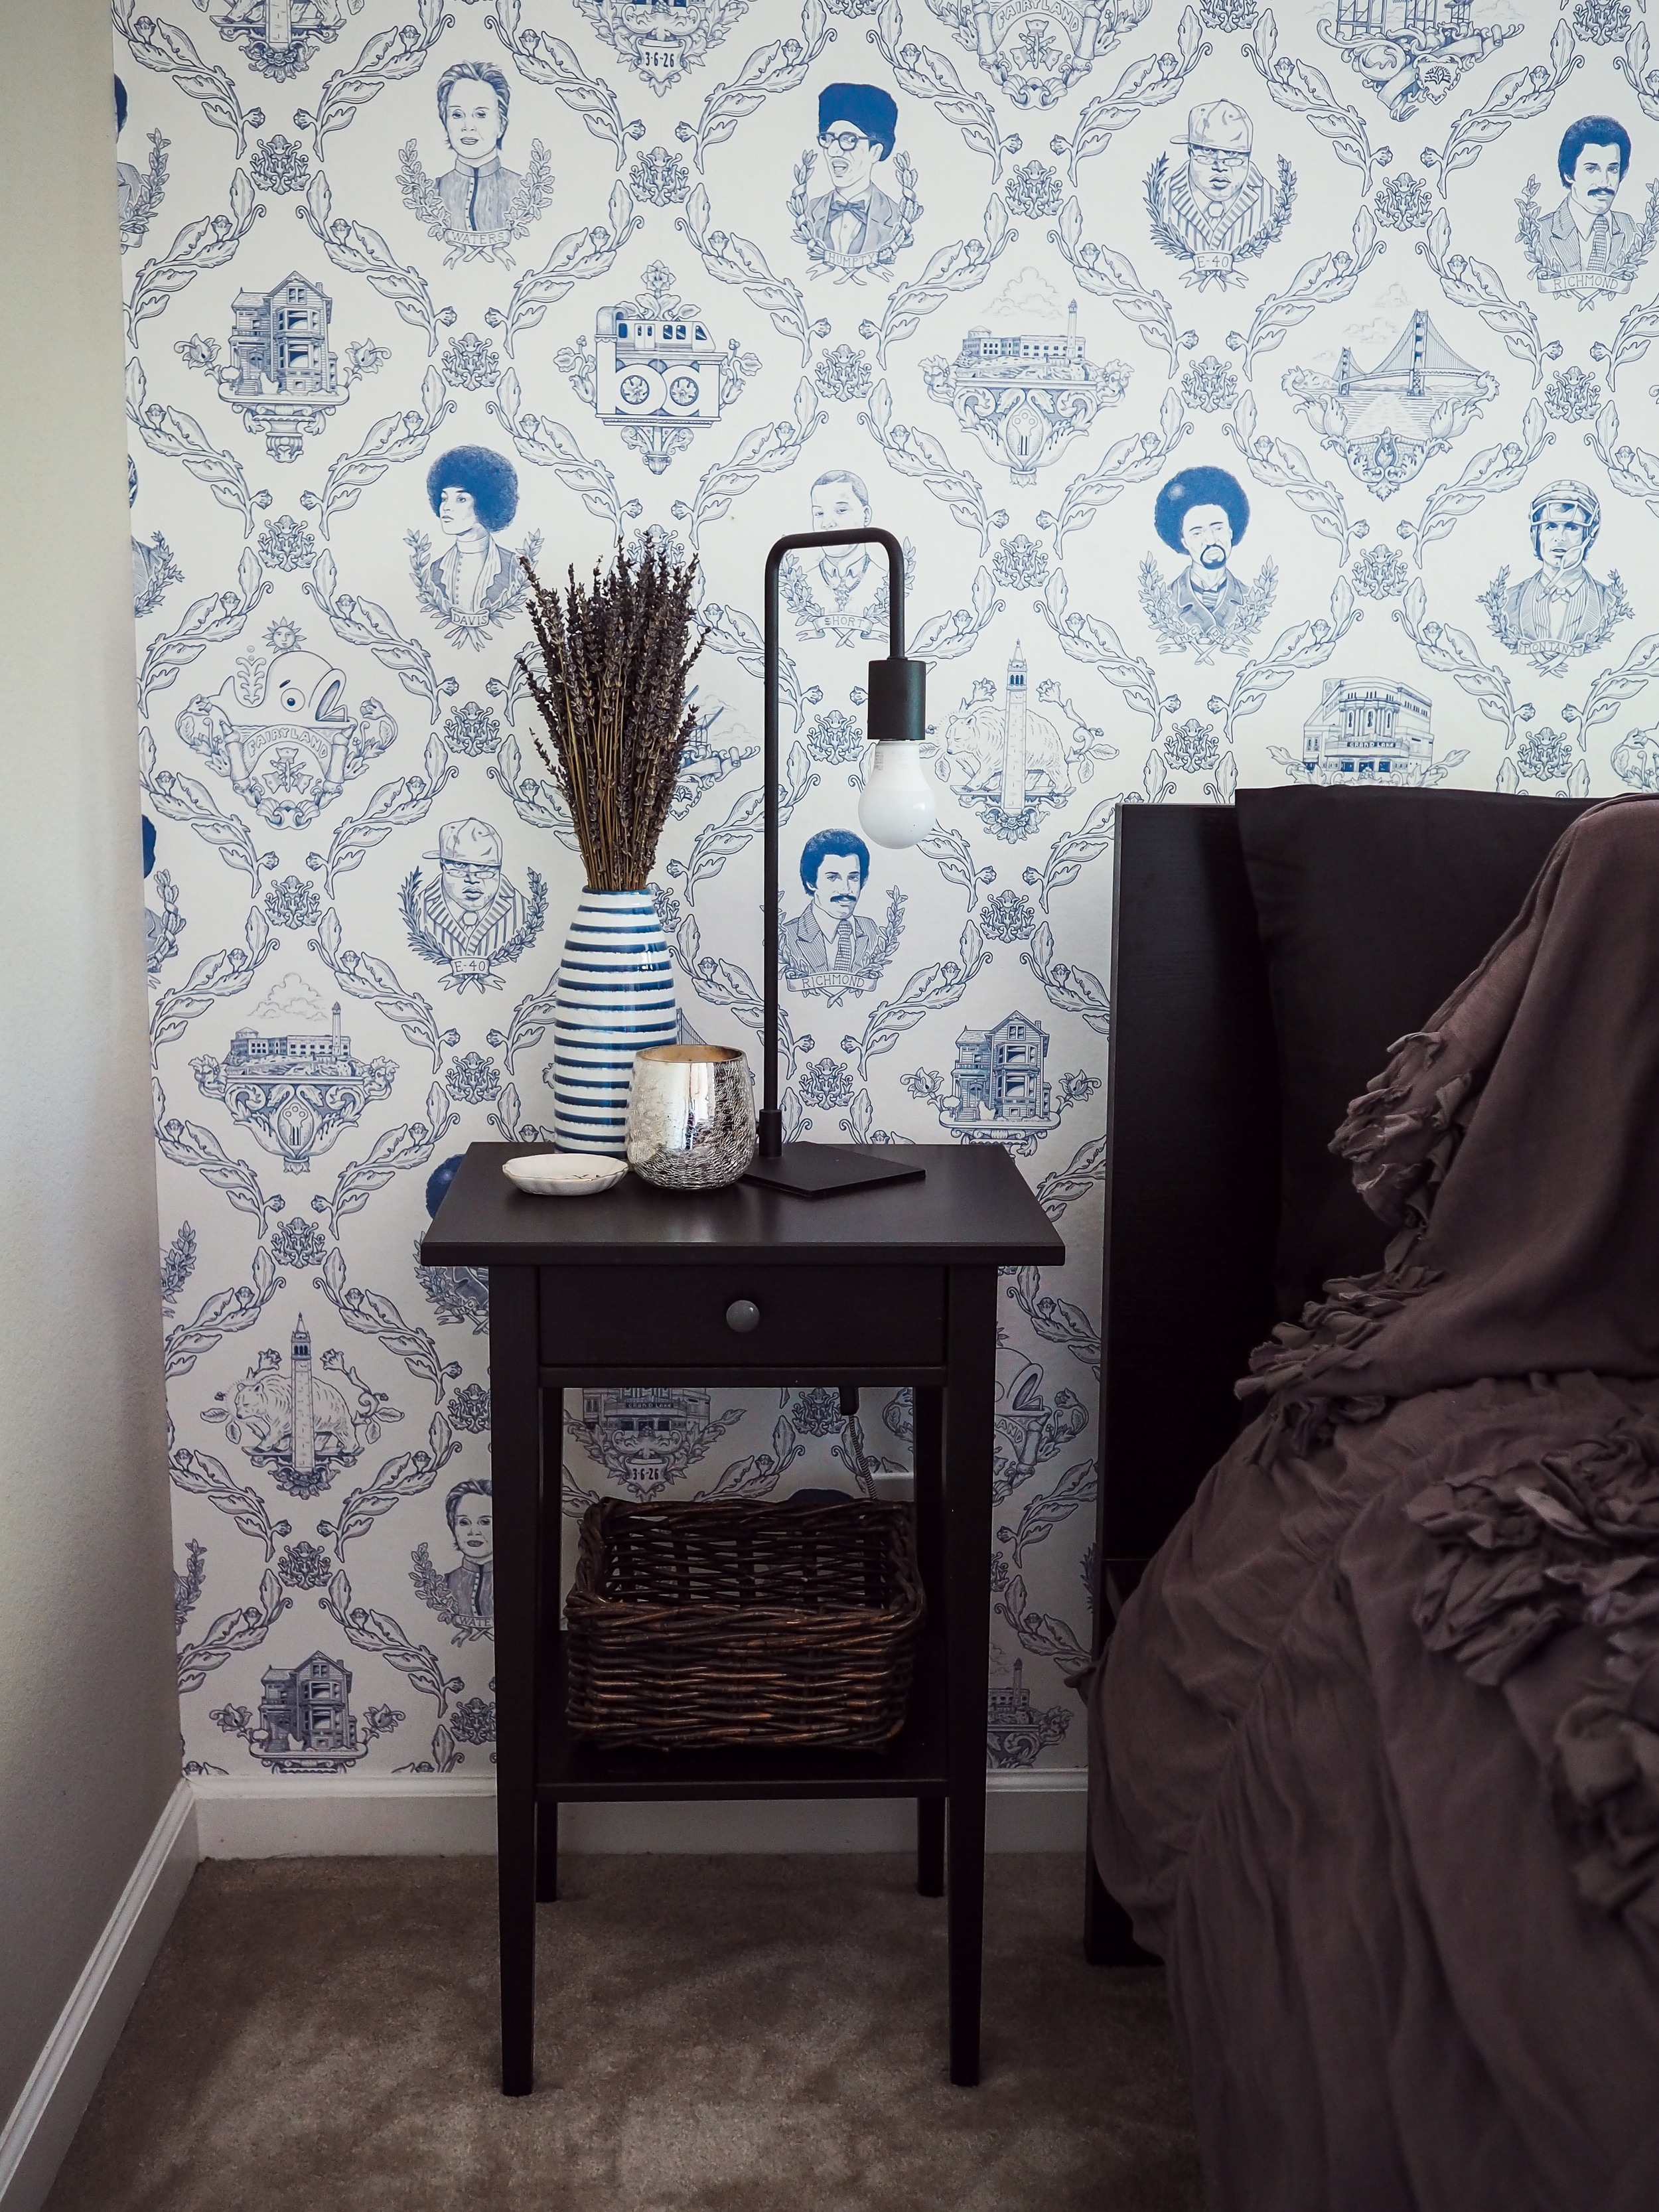 Find out how to choose the right wallpaper for your space plus pros and cons in this blog post by Kelsey of Blondes & Bagels.